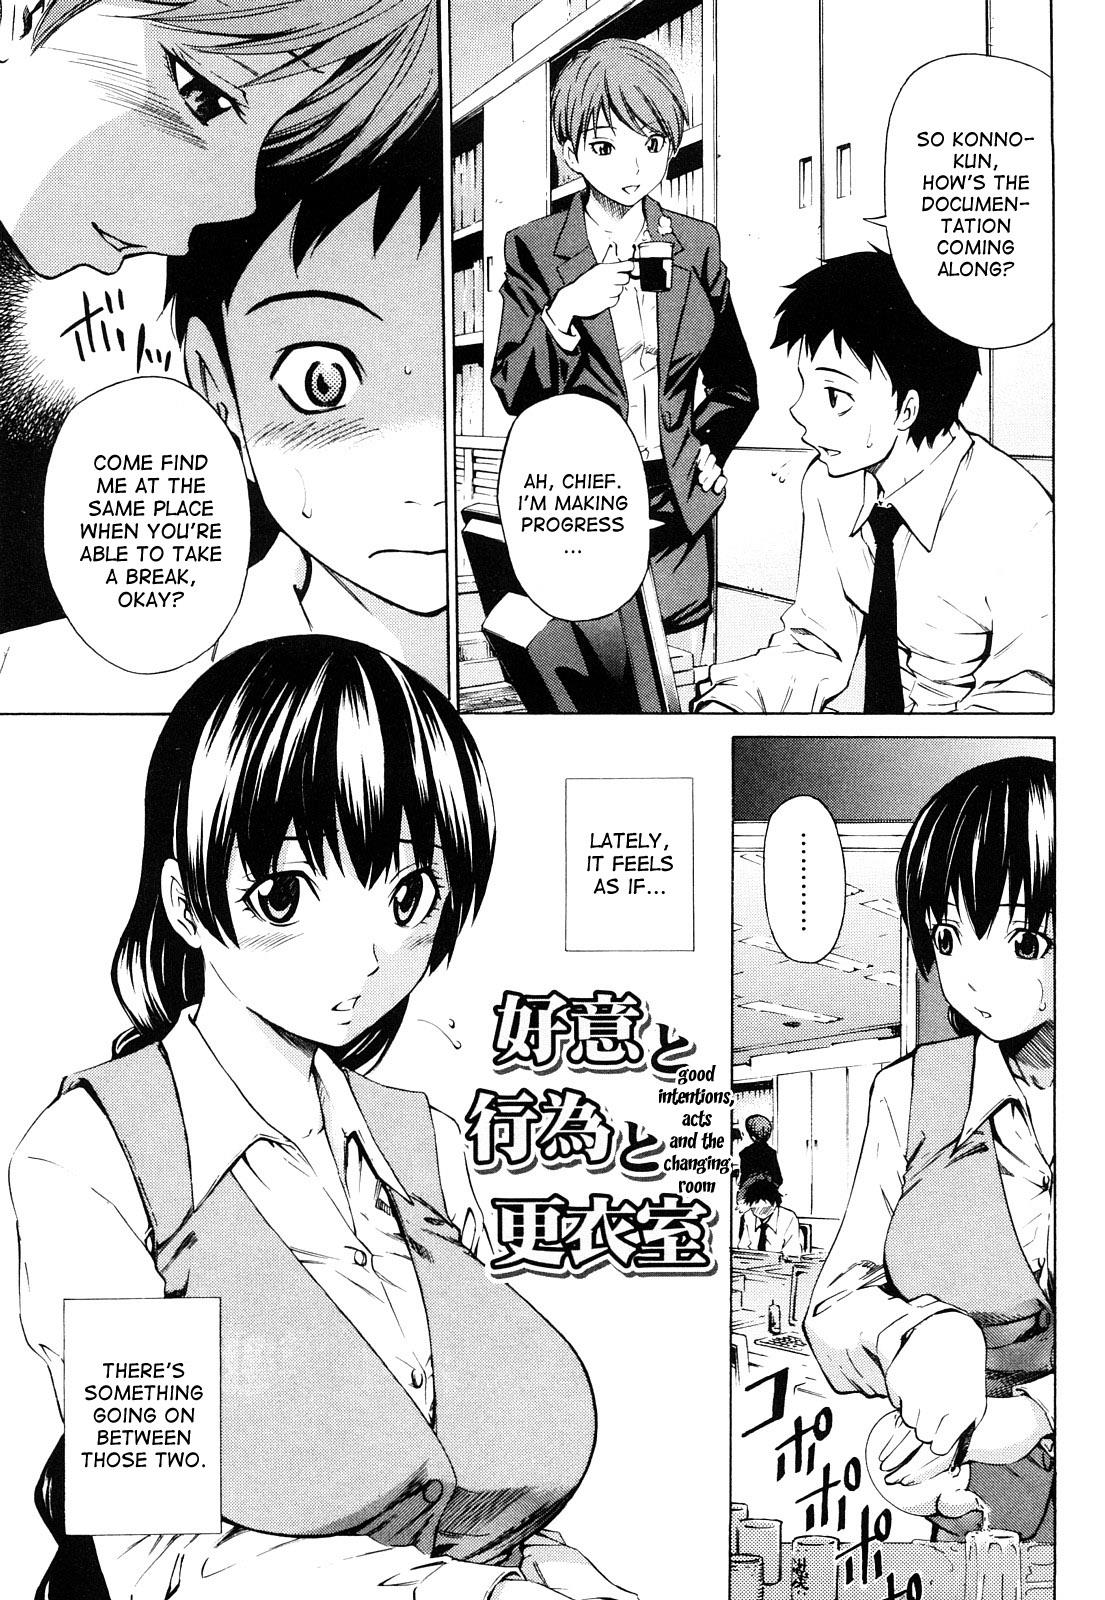 Mitsudaku Kanojo Vol.1 Chapter 12: Good Intentions, Acts, And The Changing Room - Picture 1